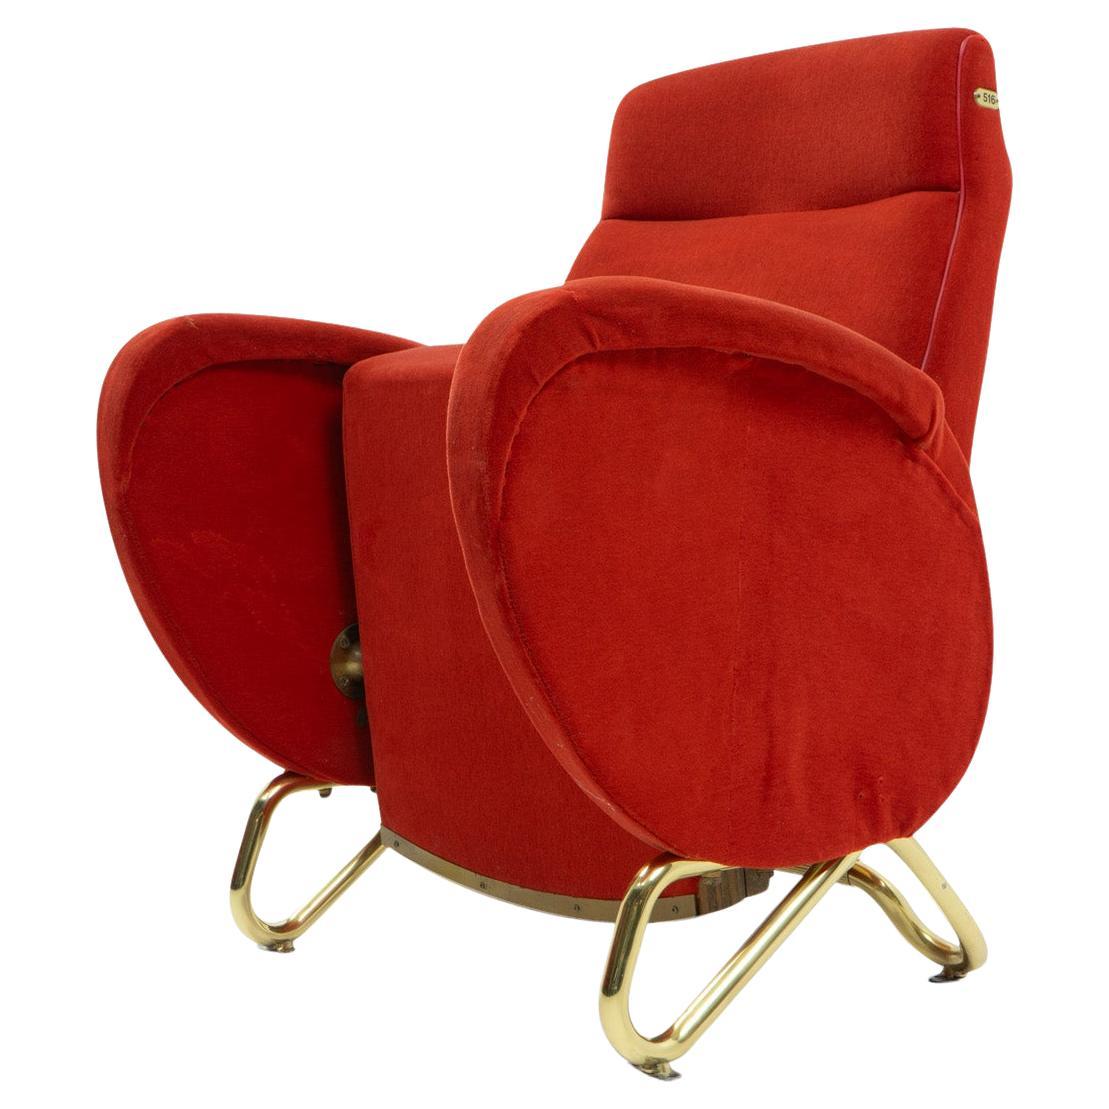 Theater chair designed by Carlo Mollino for the 1952 renovation of the RAI (Radiotelevisione Italiana) Auditorium. 

The armchair is completely original, no restorations have taken place. It retains its original seat number.


About the